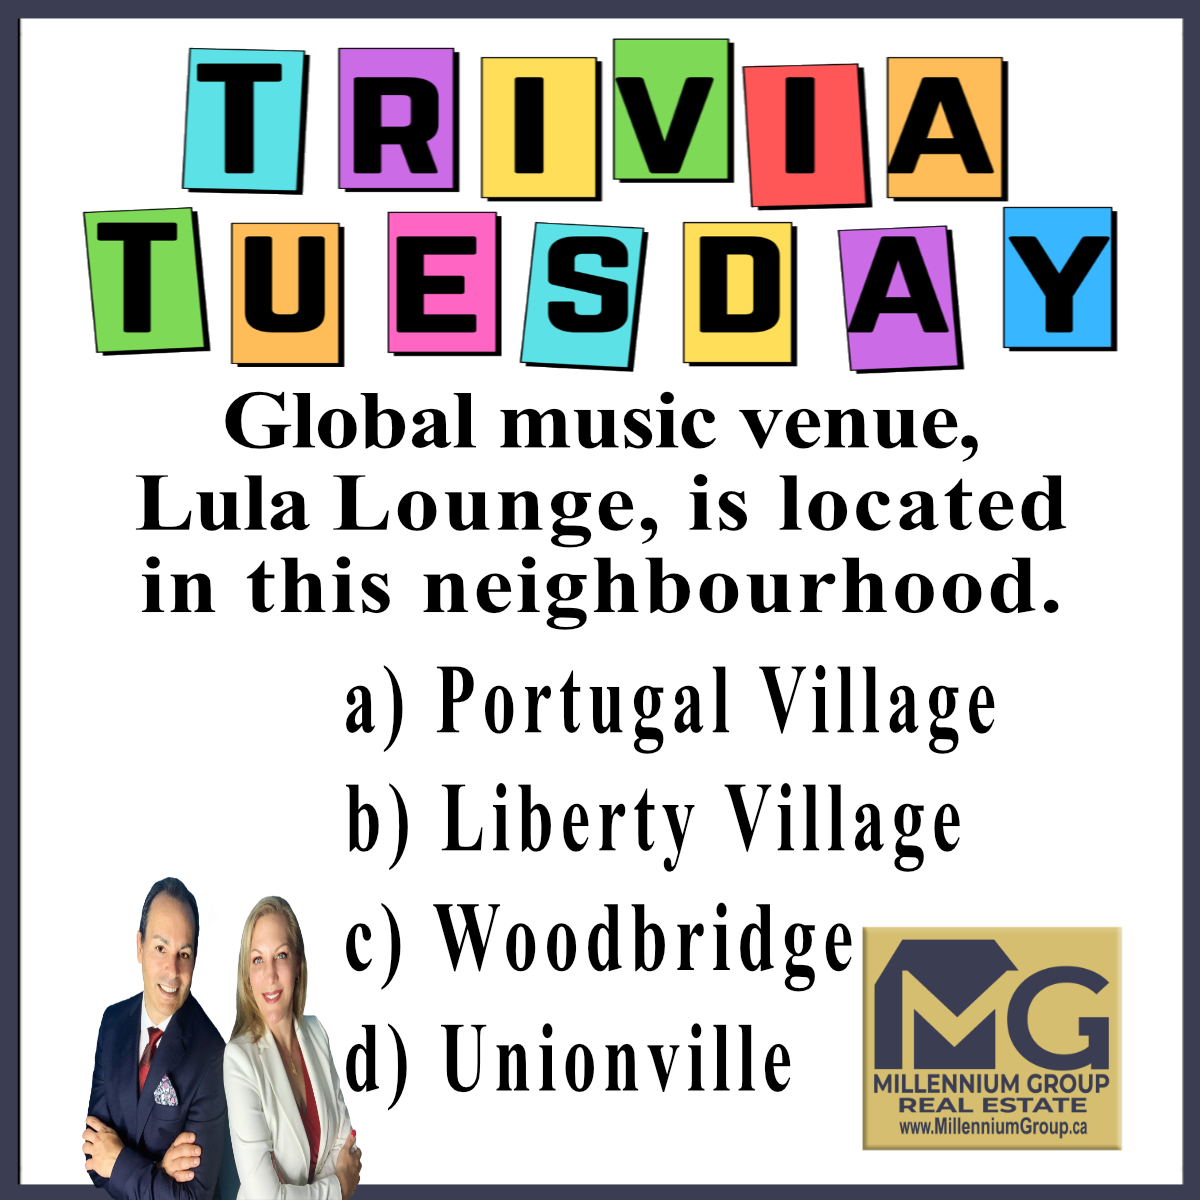 With live band + DJ, join dance lessons at Lula Lounge on Friday & Saturday! It's like being on vacation without leaving Toronto!💃🏼

#LulaLounge #LatinNights #LiveBand #Salsa #Bachata #TriviaTuesday #TuesdayTrivia #OntarioTrivia #TorontoTrivia #NeighbourhoodTrivia